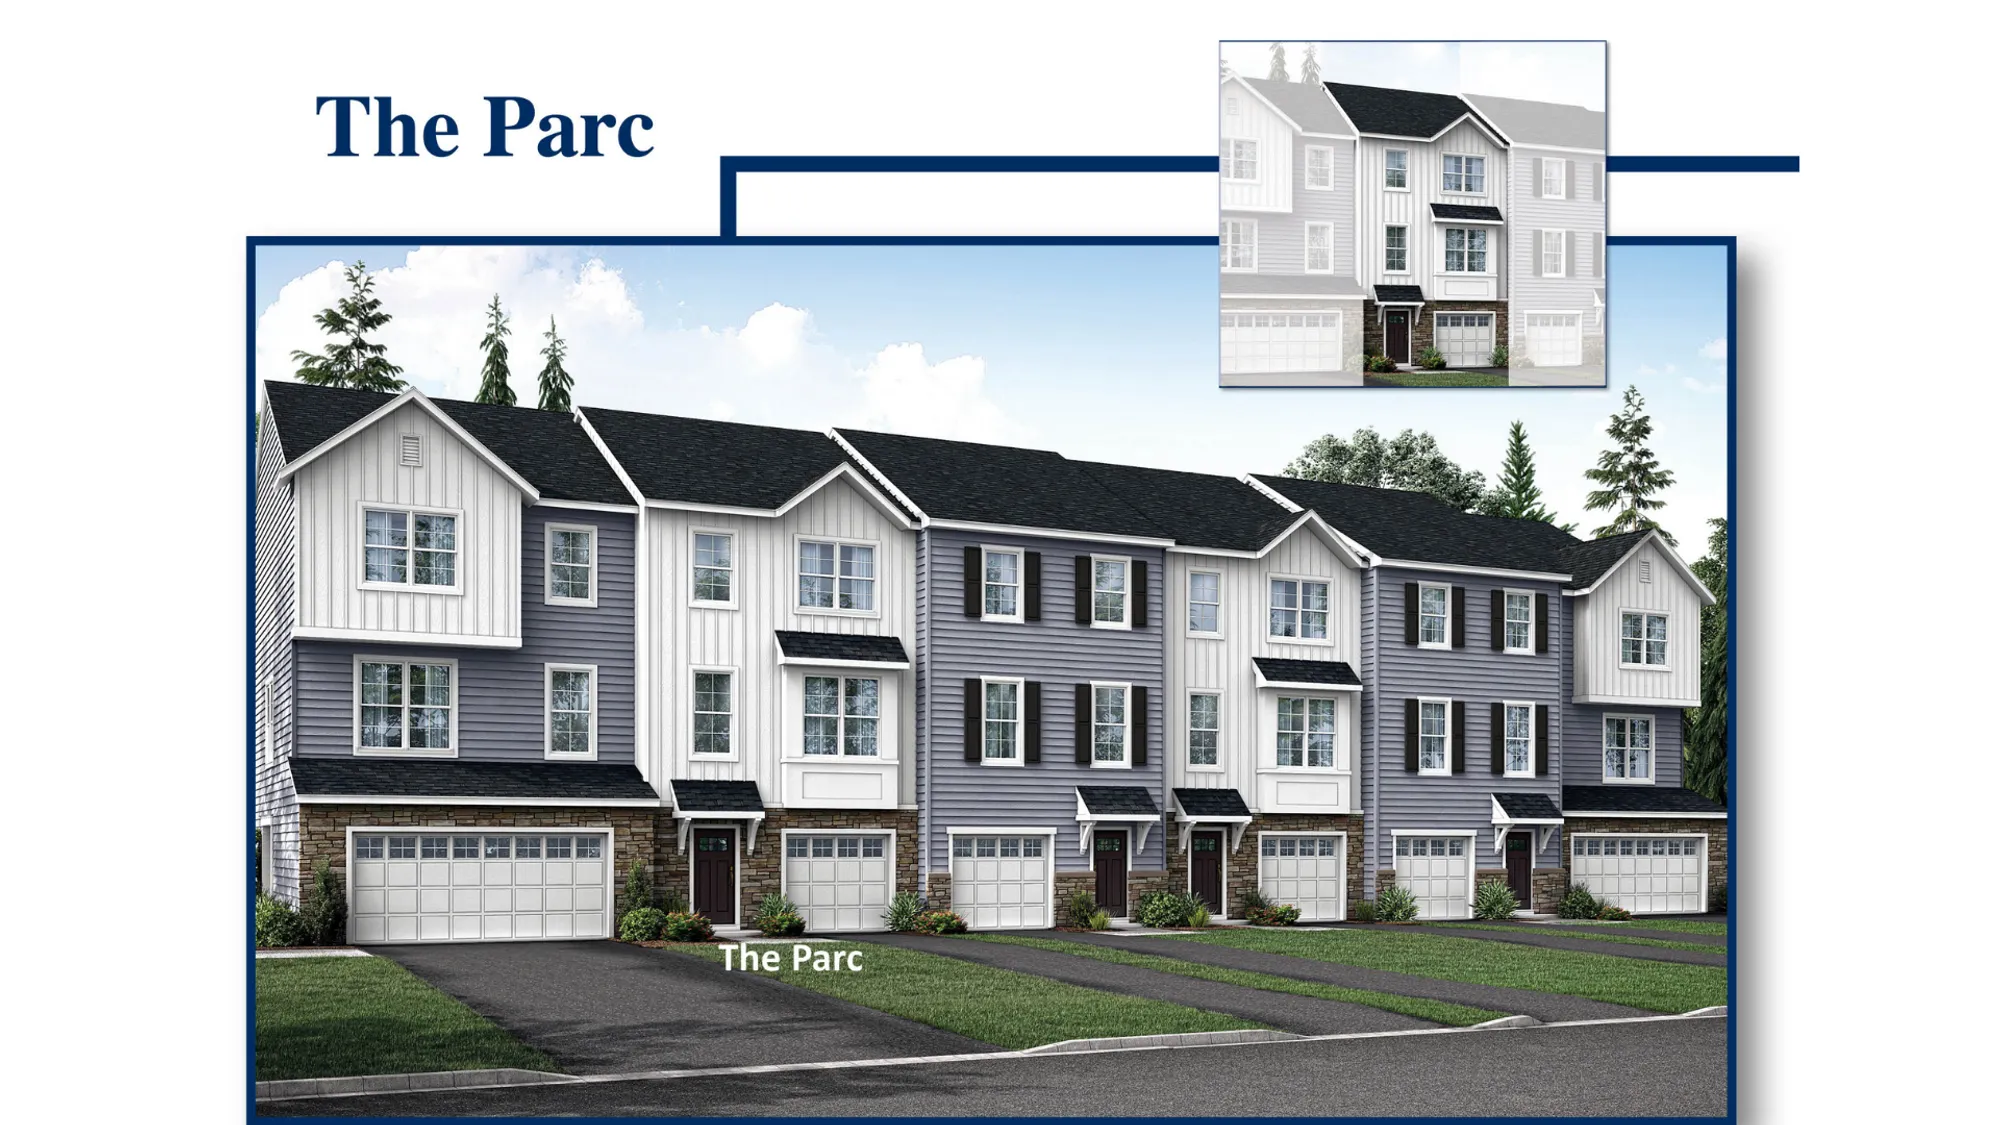 Exterior of the The Parc model new townhome in south Jersey, illustrated with 1 car garage, siding, plus stone on first floor facade.